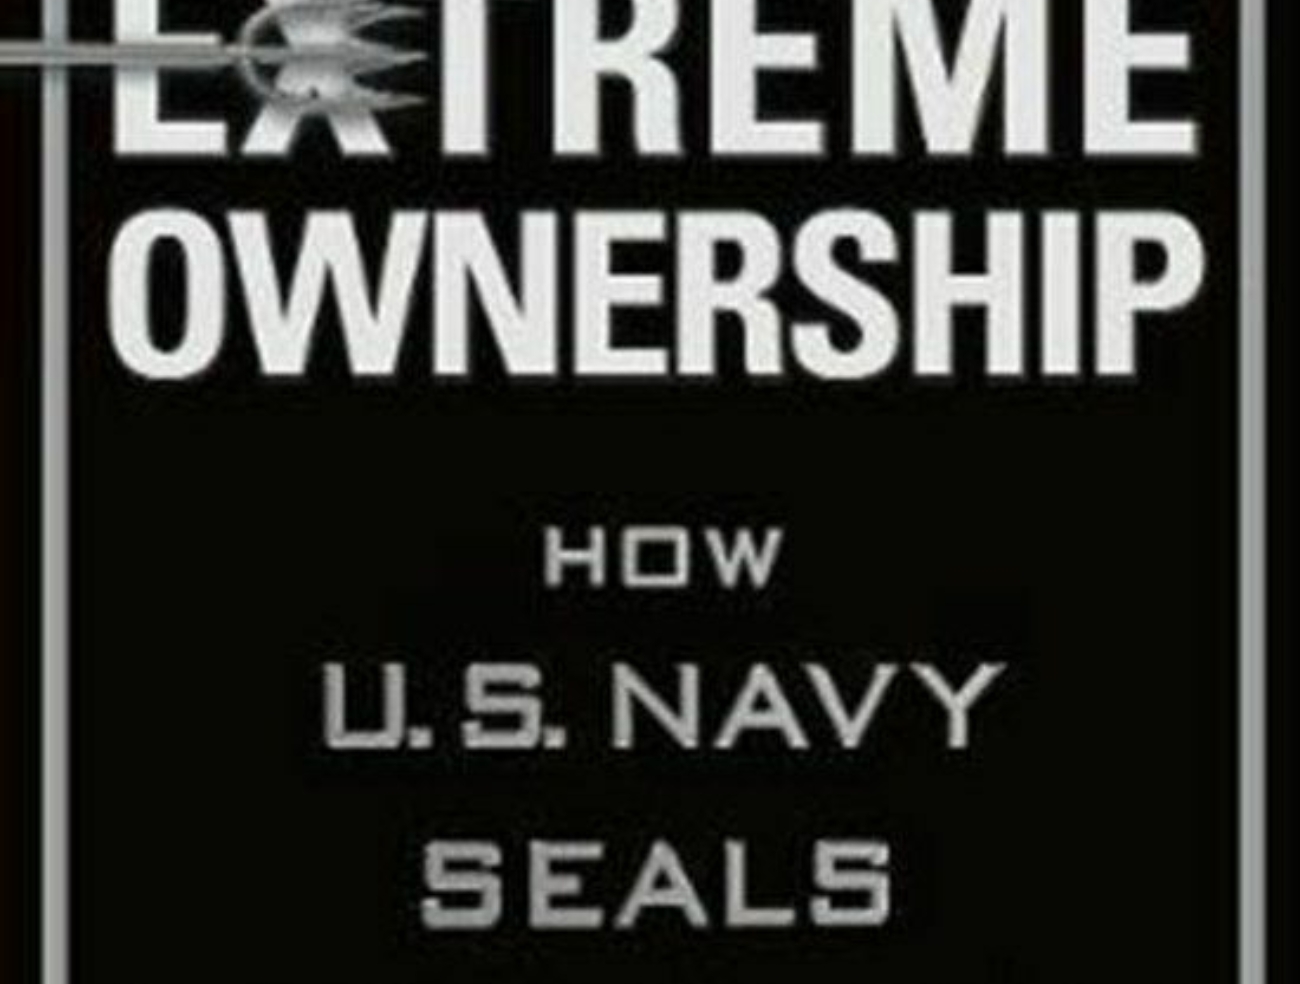 Book review: Extreme ownership by Jocko Willink and Leif Babin